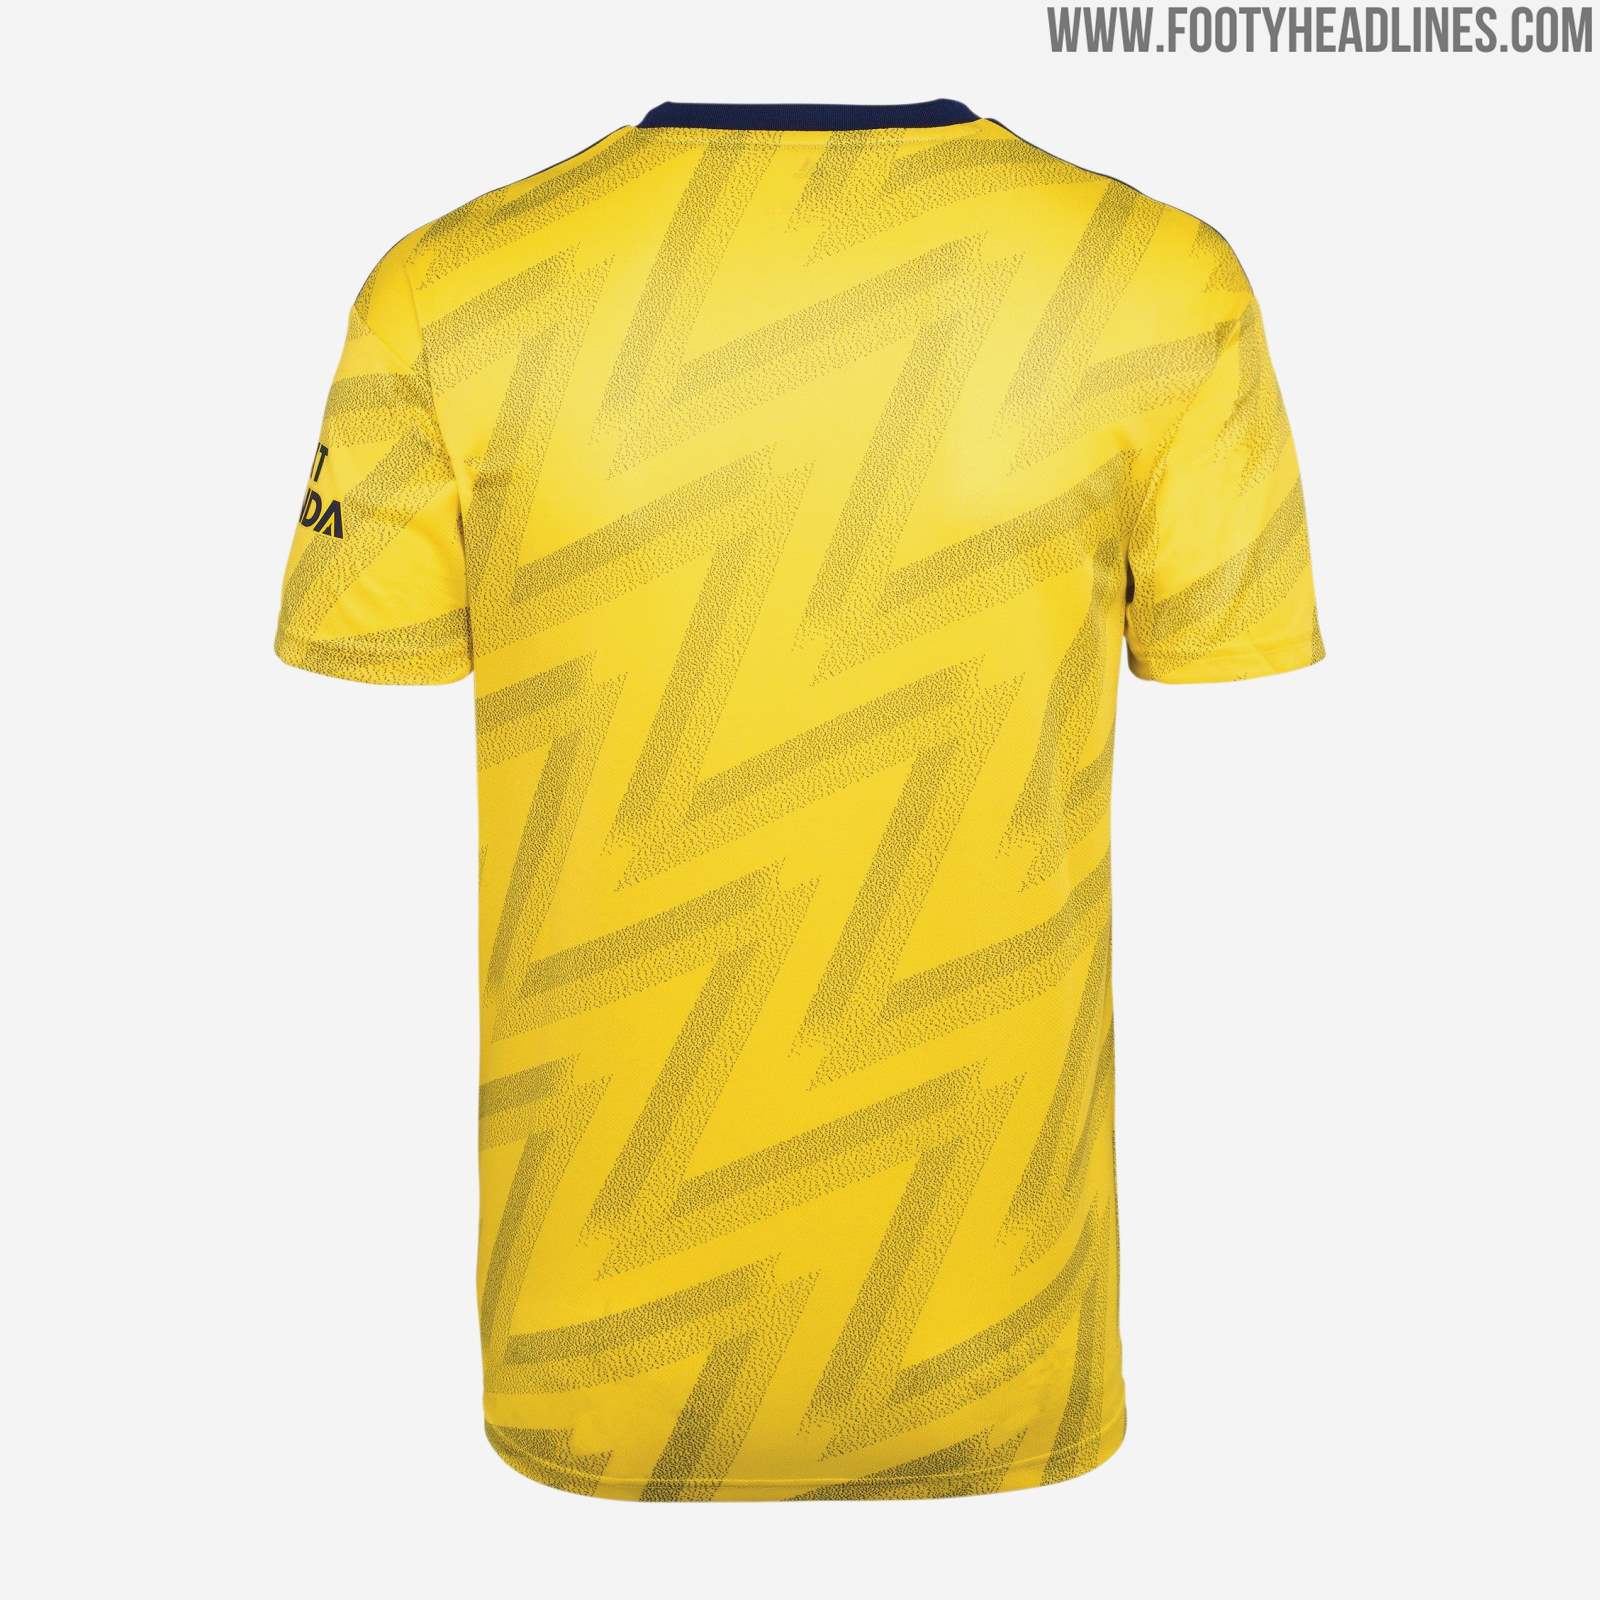 Arsenal's new 2019/20 season 'bruised banana' away kit is now available to  buy 